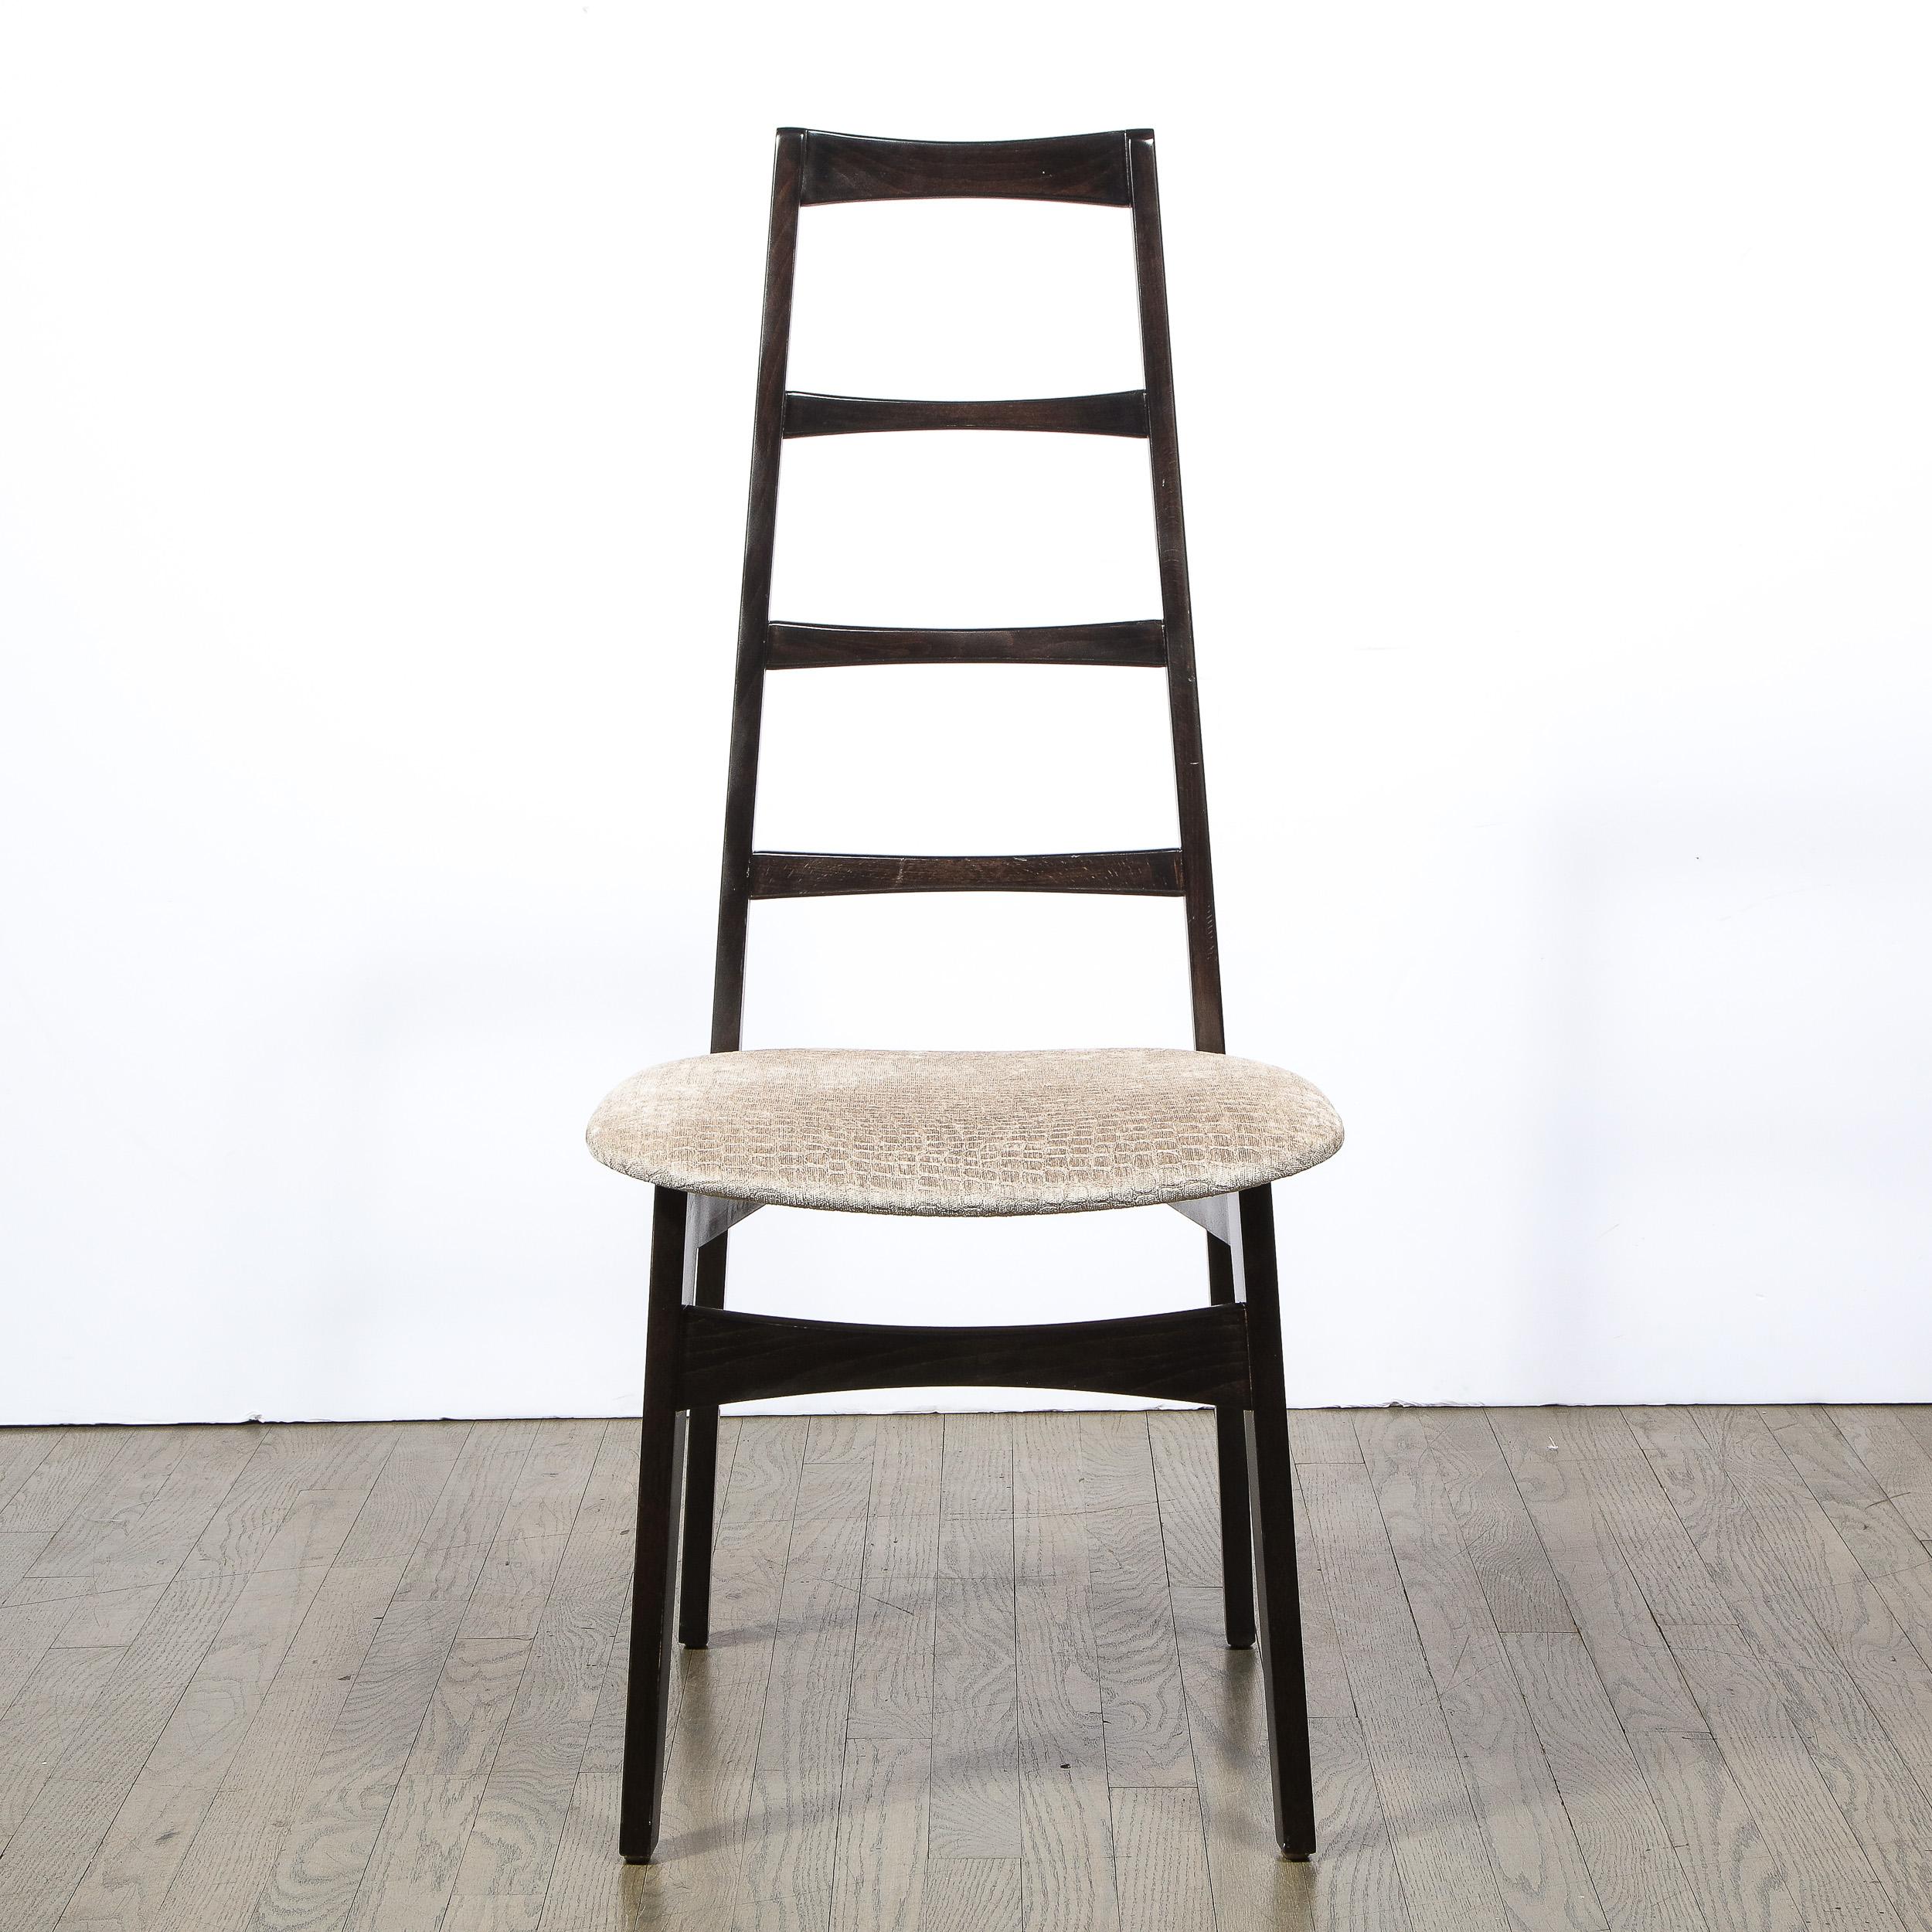 This elegant set of six Mid Century Modern chairs were designed by the great Niels Koefoed for Koefoeds Hornslet, model 